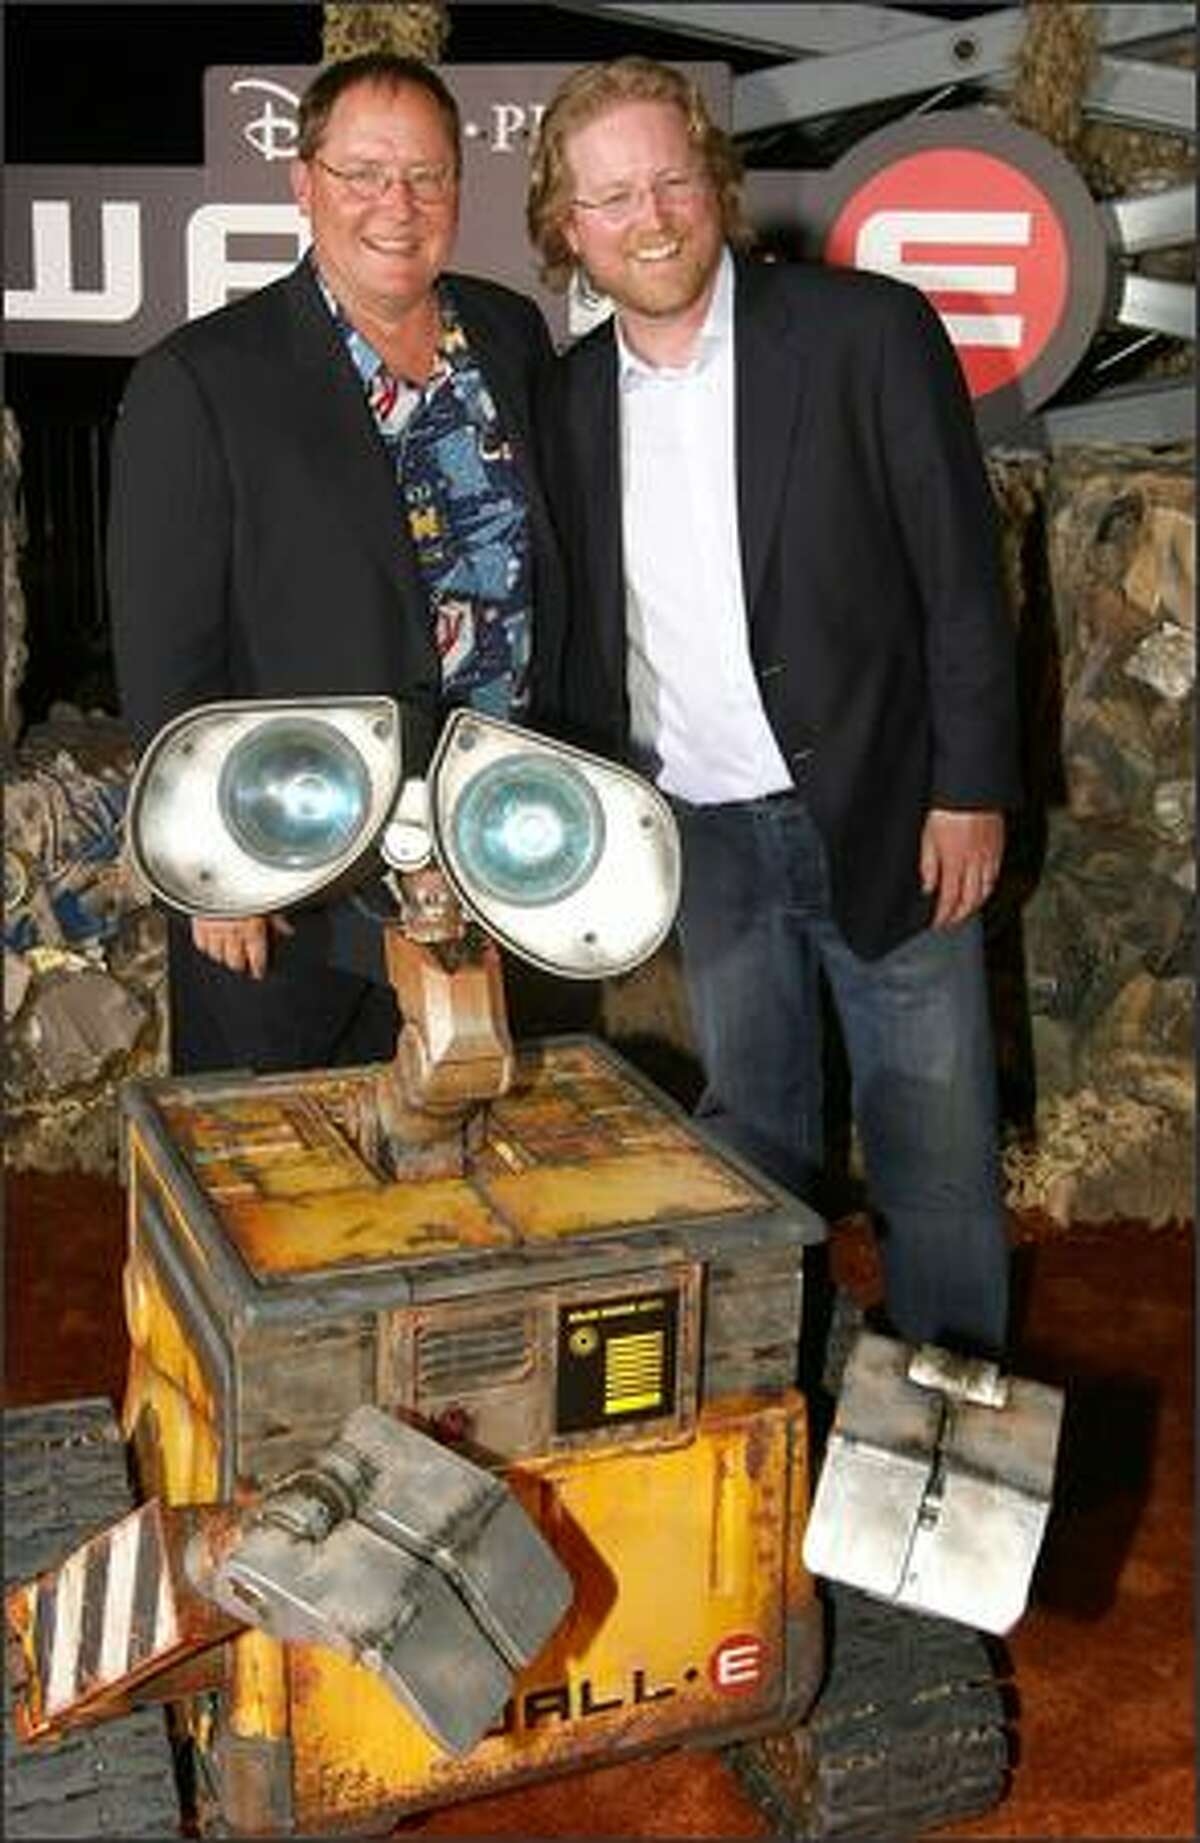 Producer John Lasseter and director Andrew Stanton arrive at the world premiere of Disney-Pixar's film "WALL-E" at the Greek Theater on Saturday in Los Angeles, California.